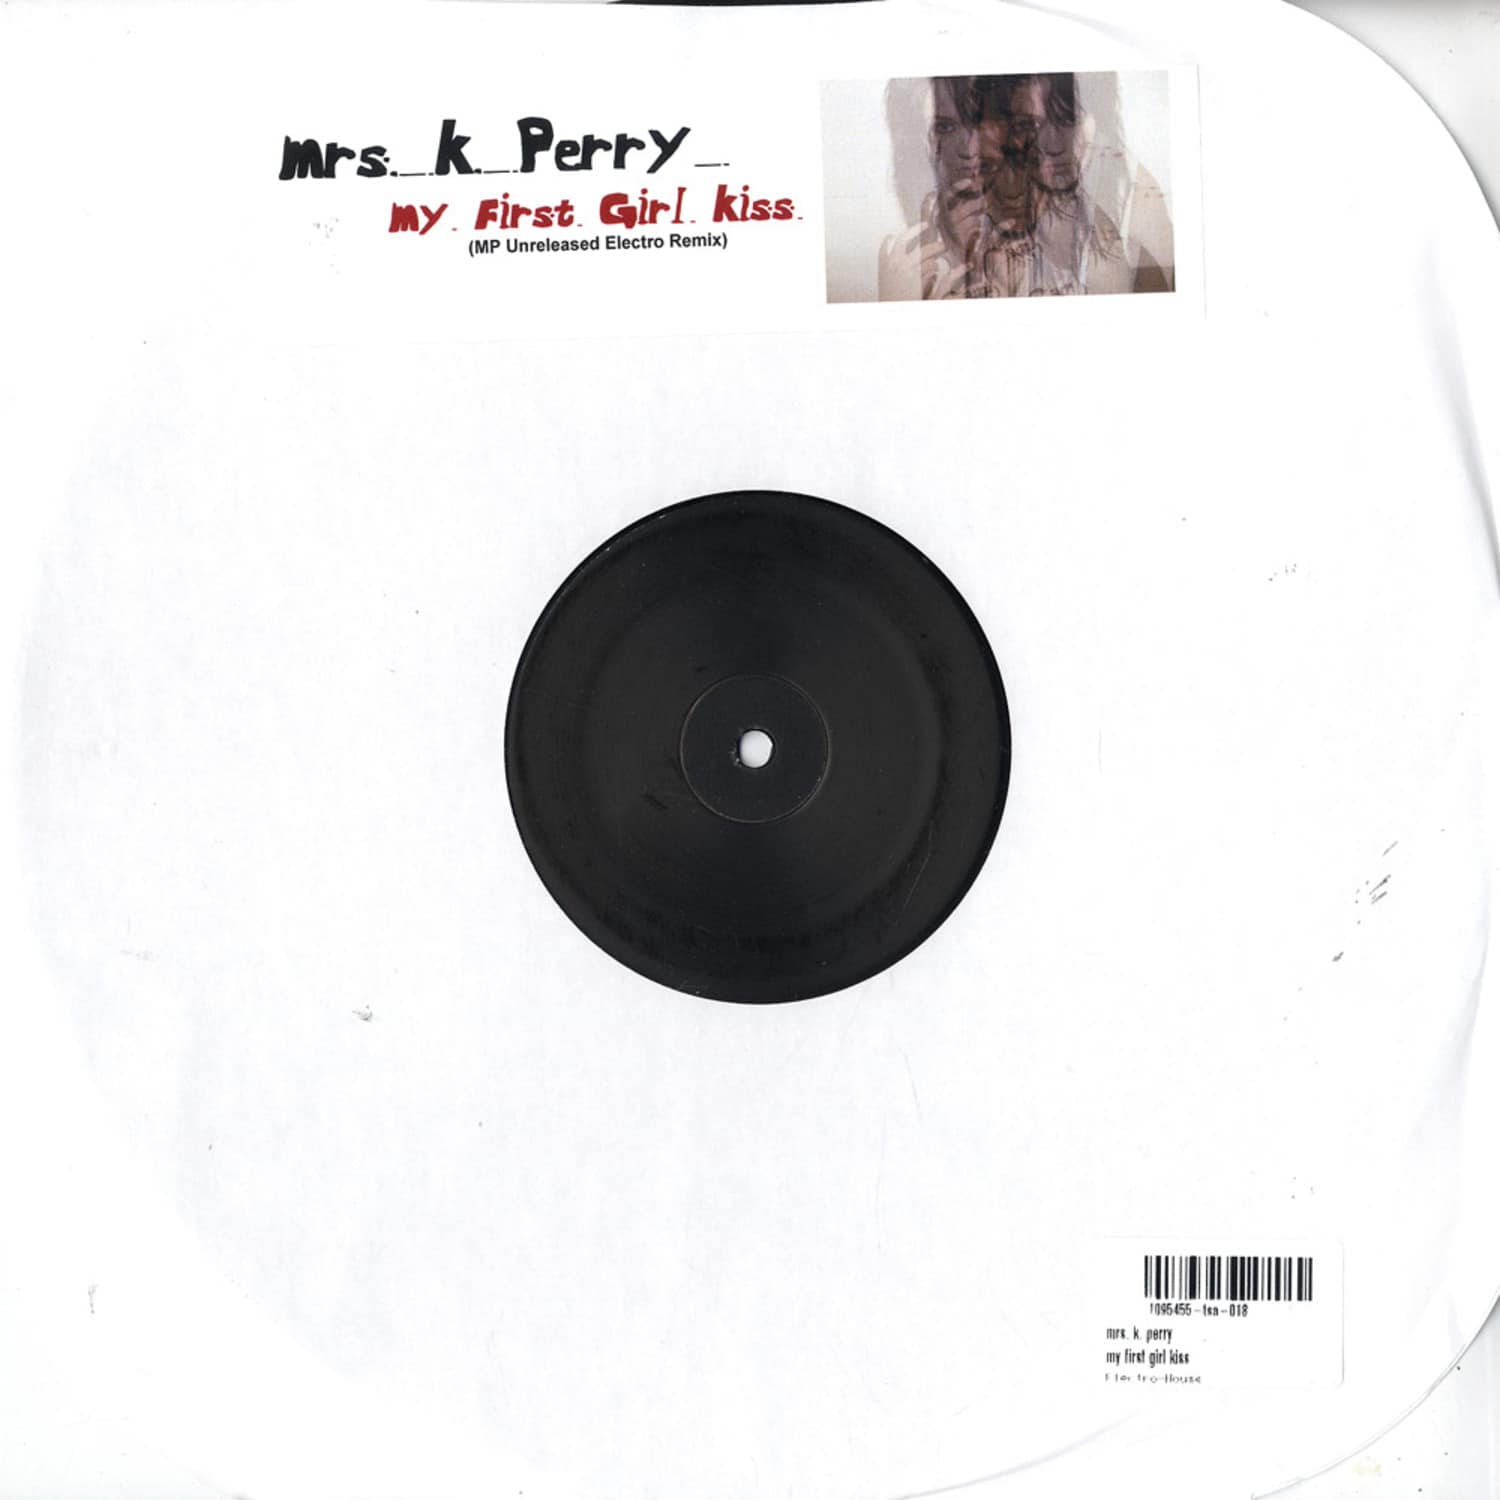 Mrs. K. Perry - MY FIRST GIRL KISS